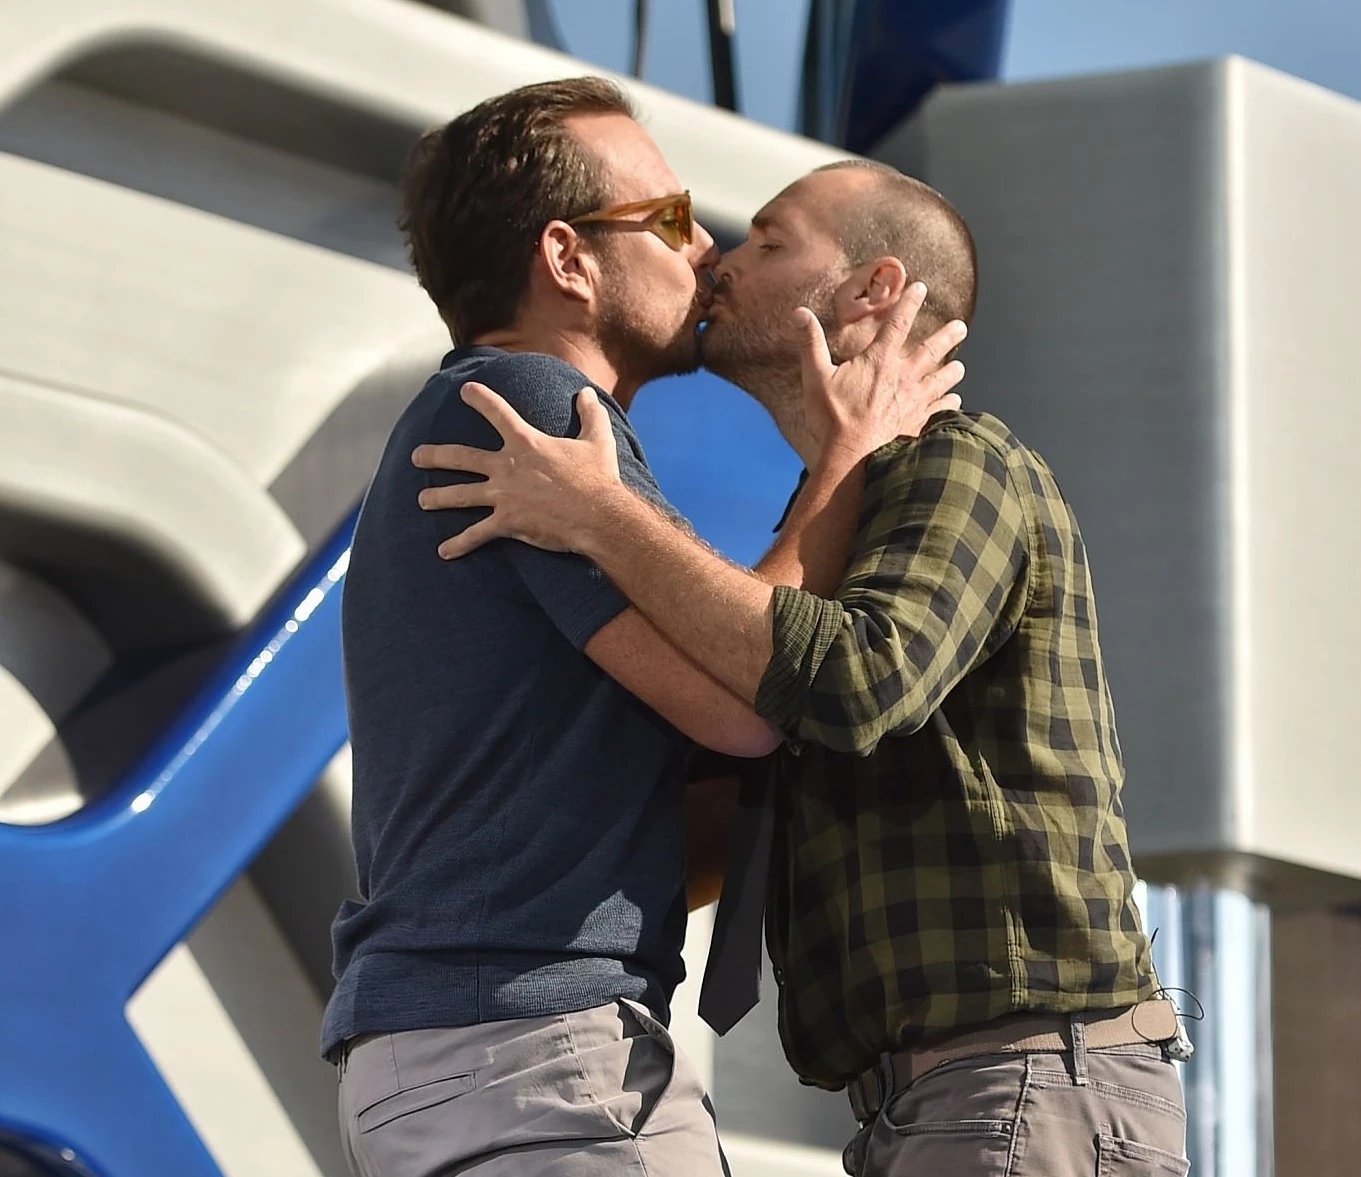 Tabloid Rumors and Speculation - is will arnett gay